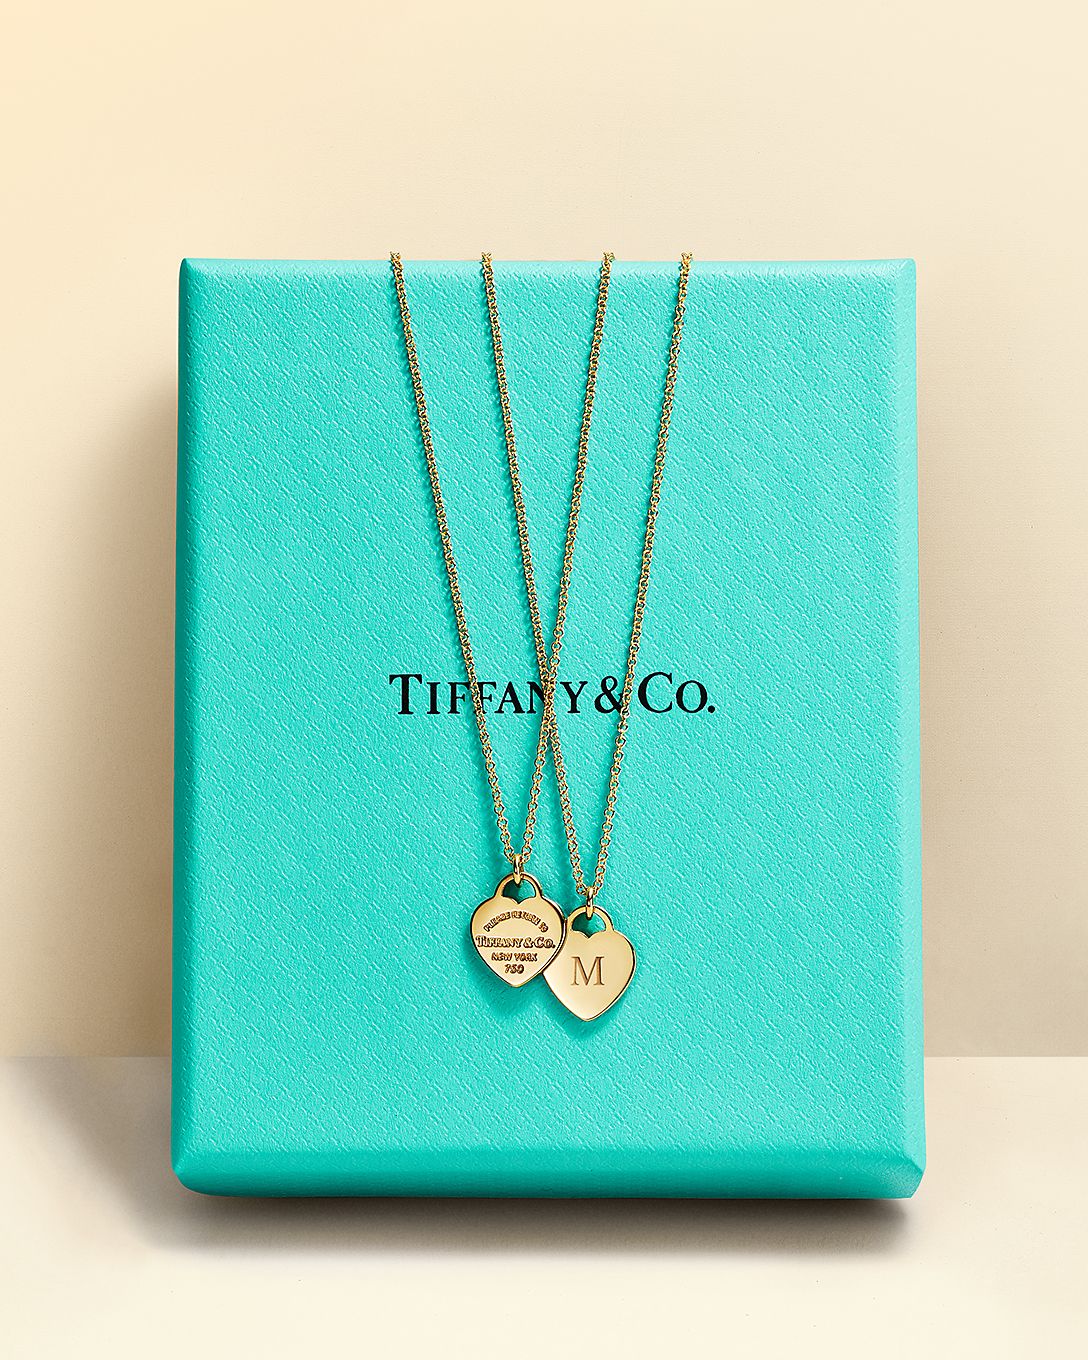 Tiffany & Co. AU | Luxury Jewellery, Gifts & Accessories Since 1837